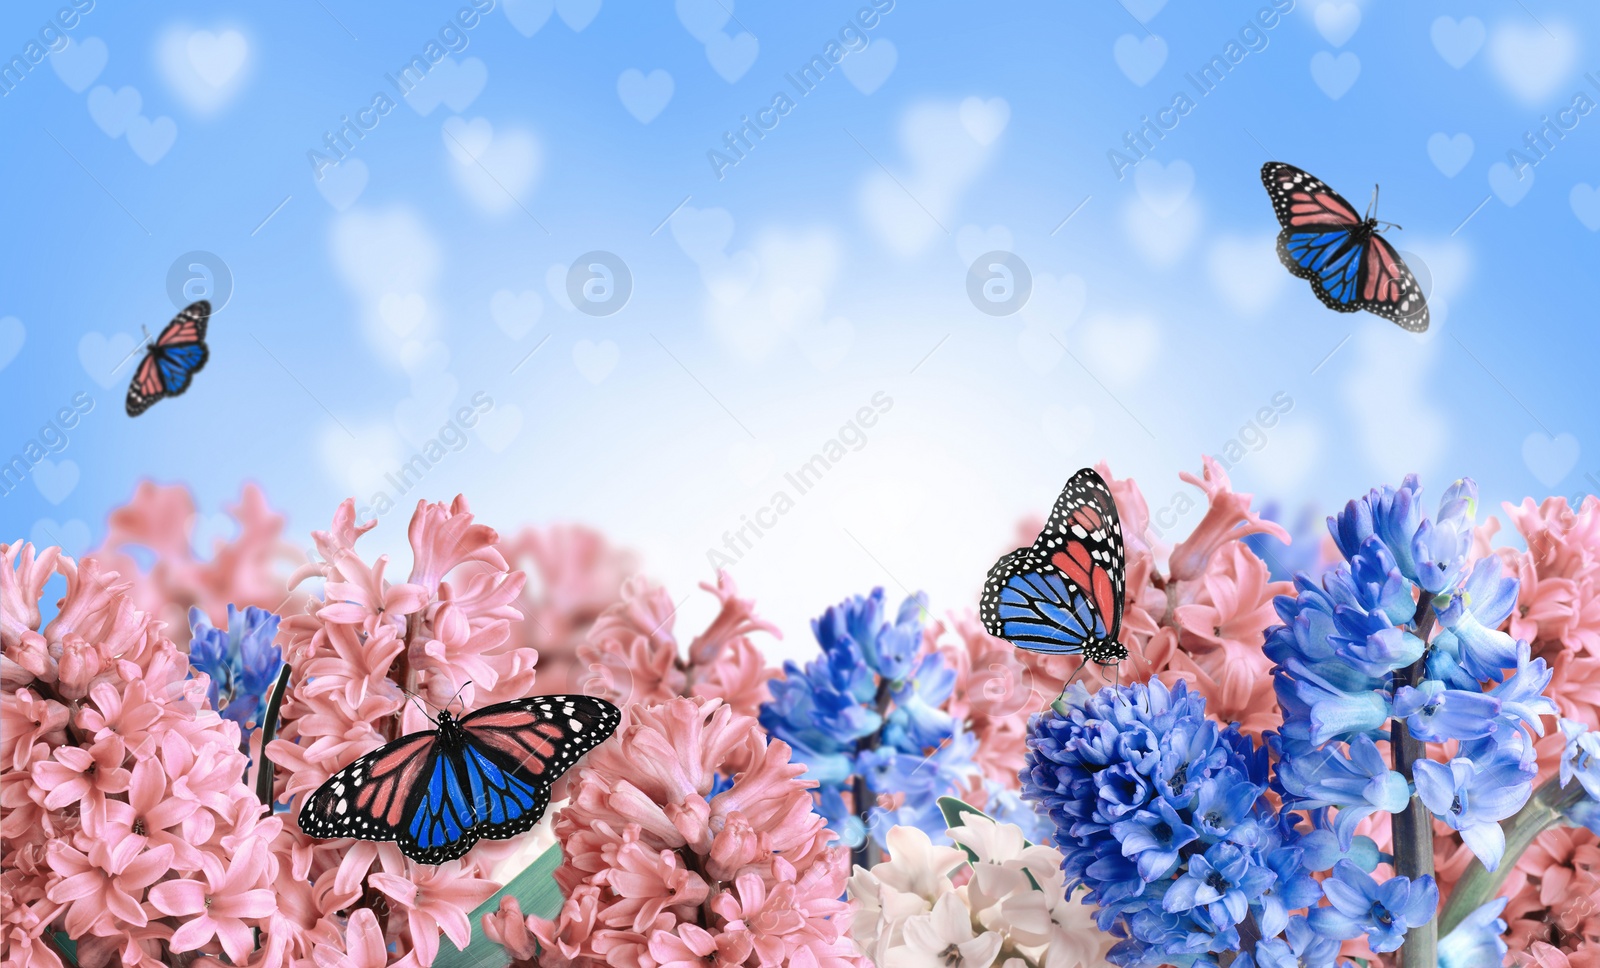 Image of Beautiful hyacinth flowers and amazing fragile monarch butterflies